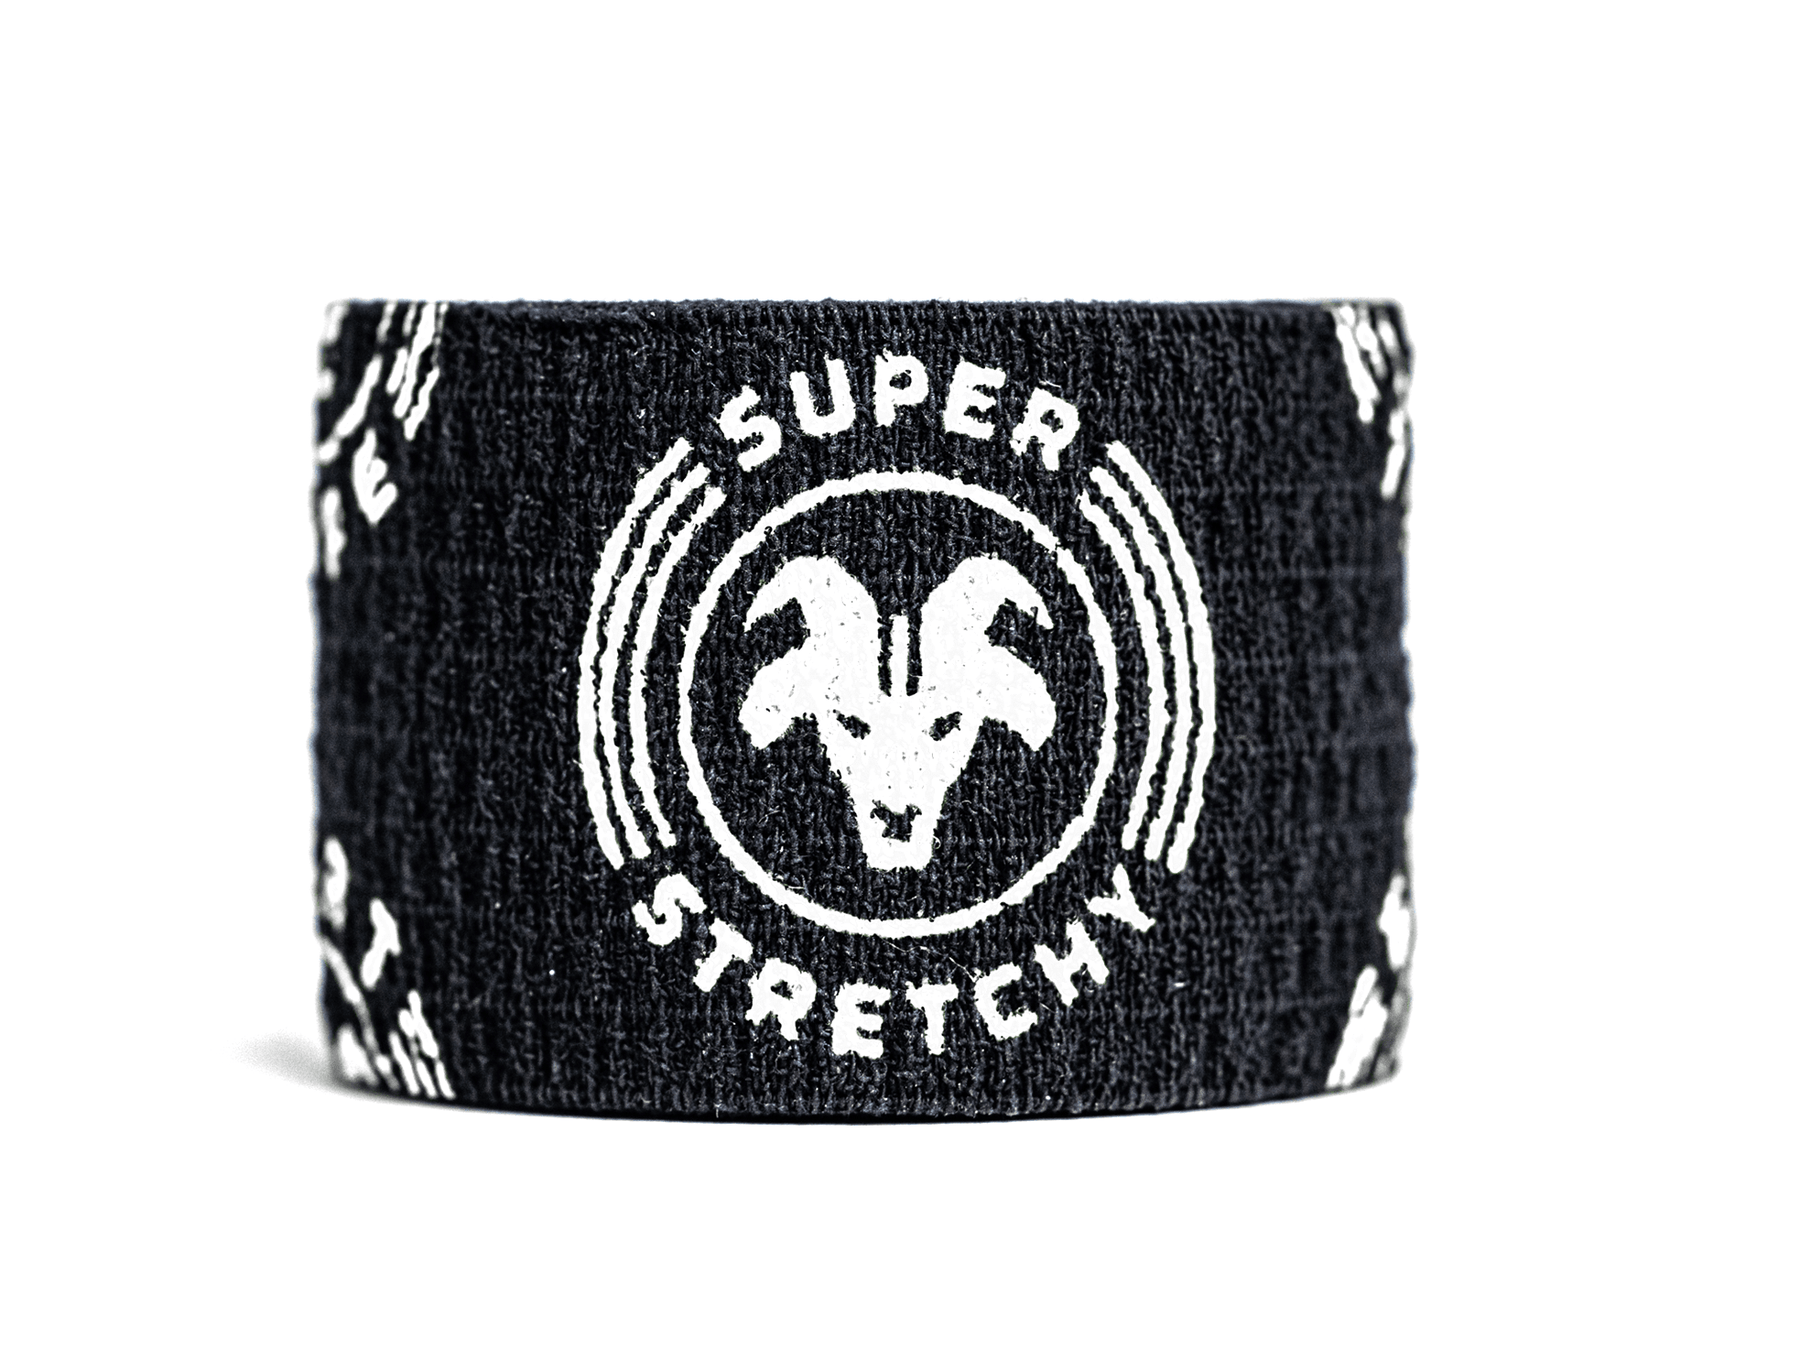 Goat Tape  The premier provider in athletic tape. It's Scary Sticky.